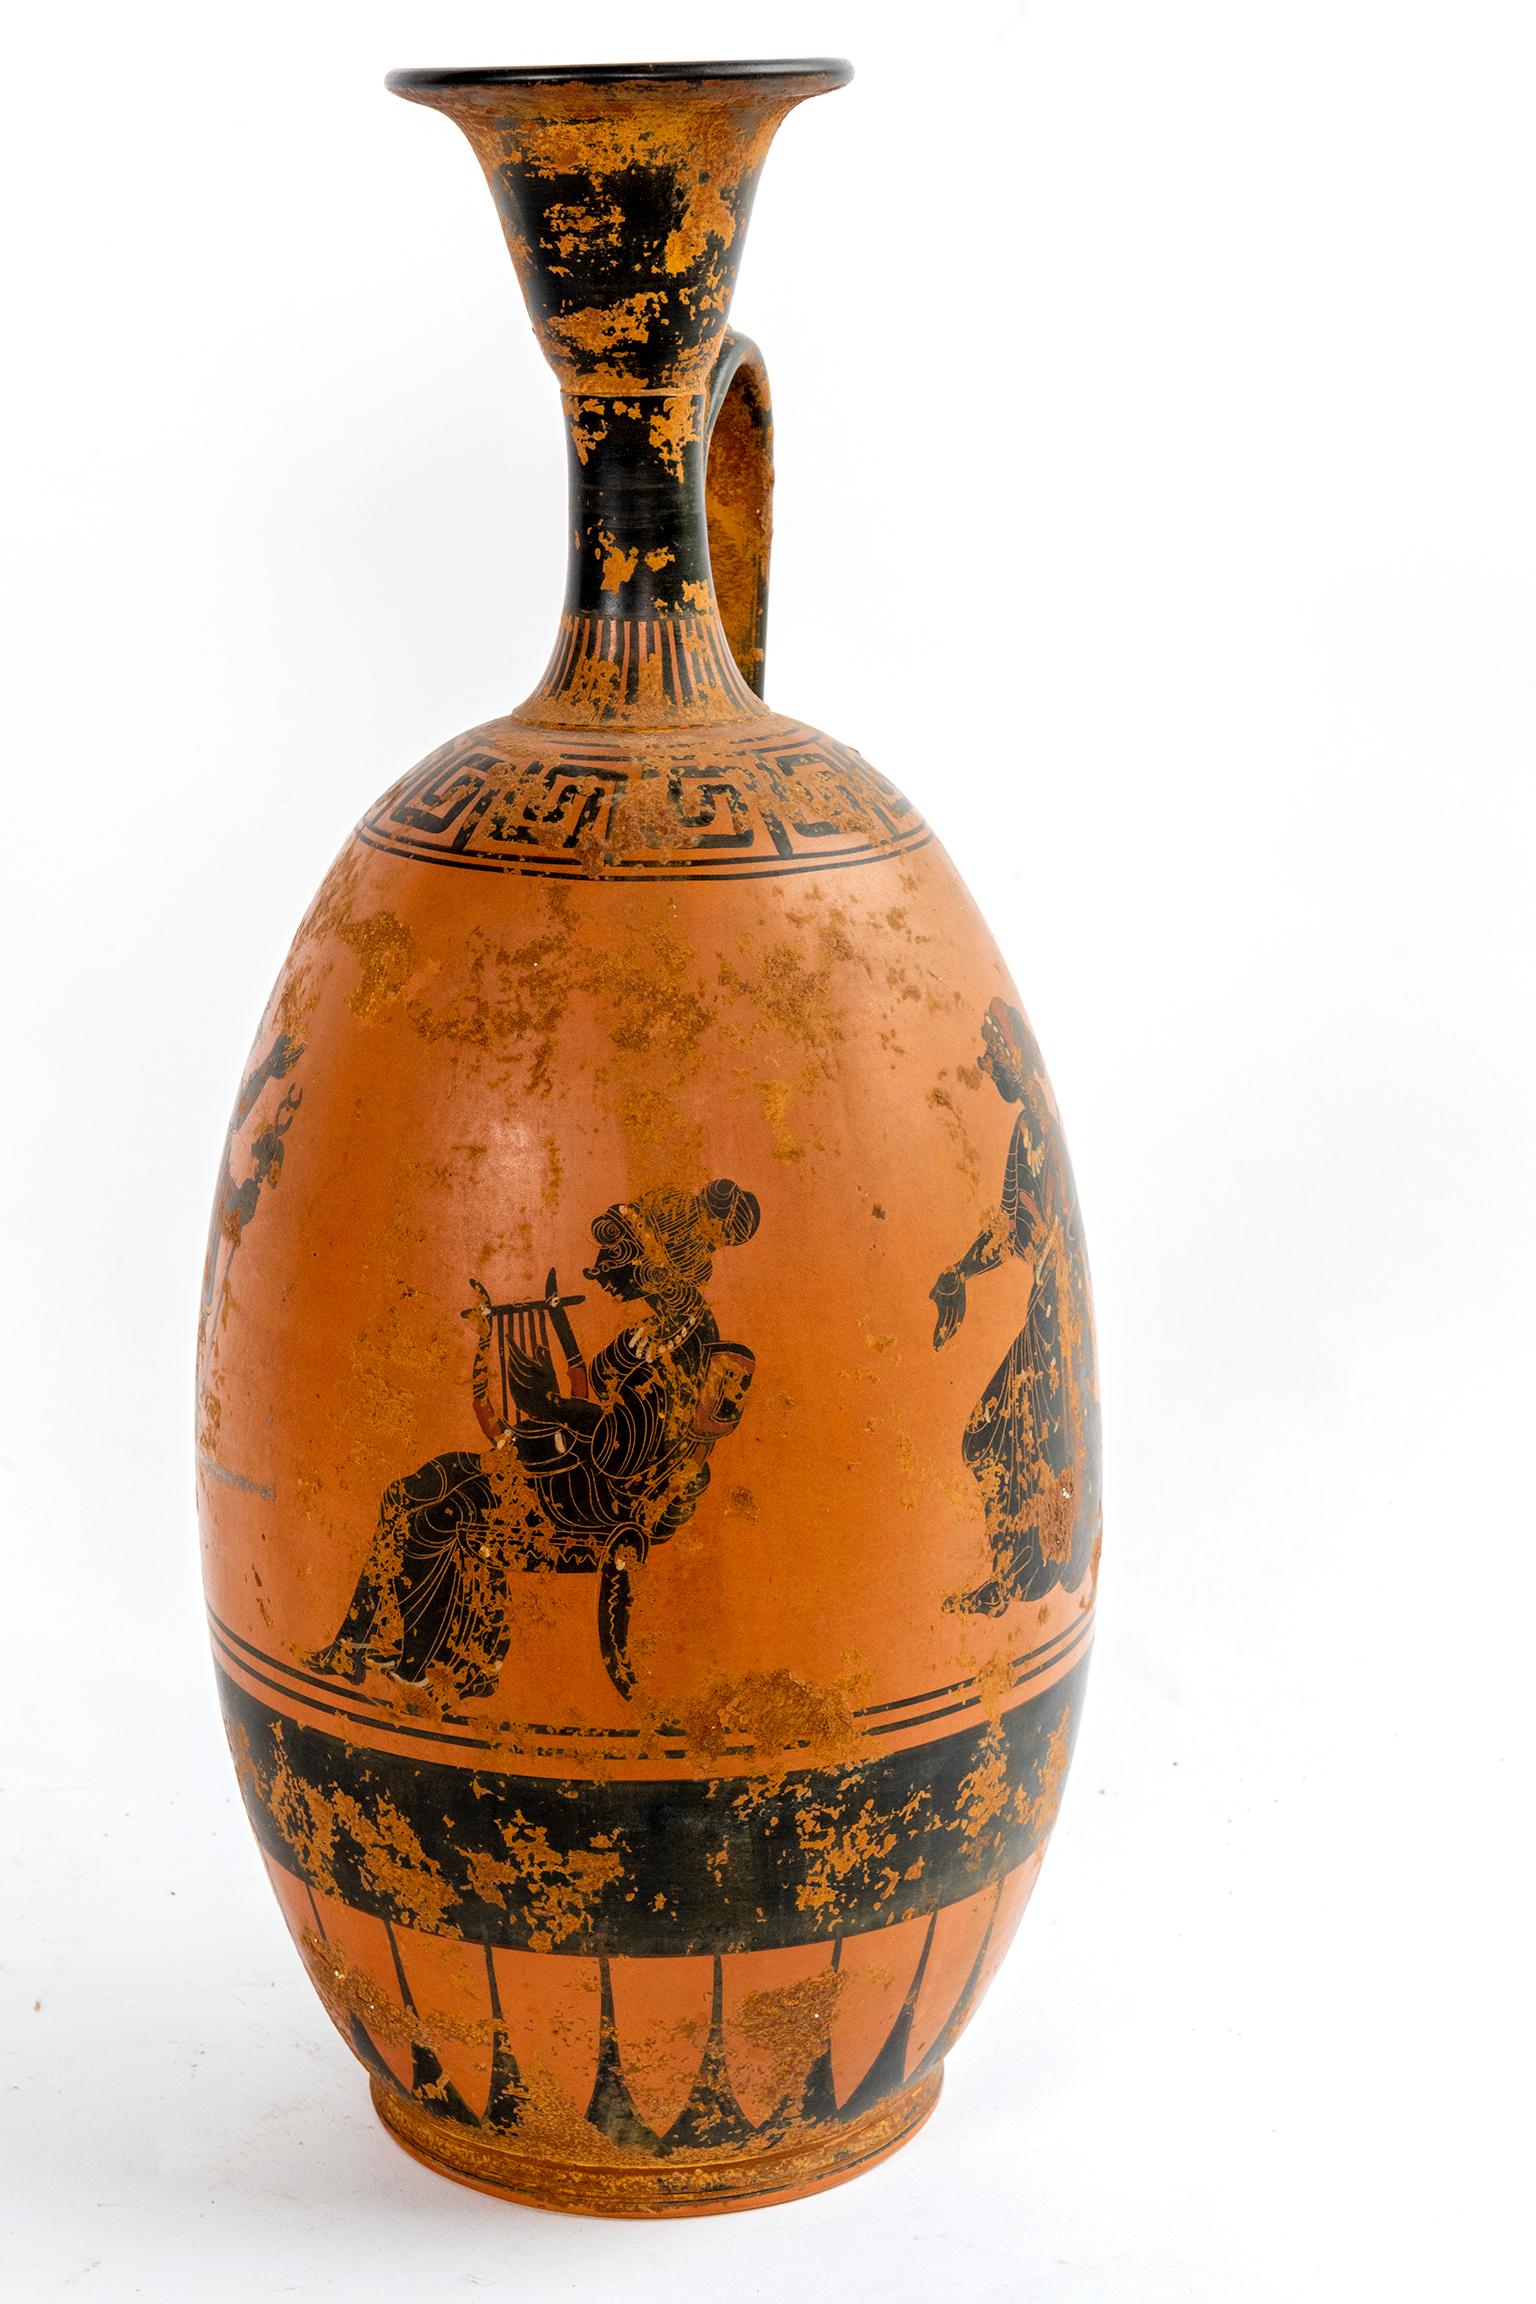 19th Century Painted Greek Vessel with a Single Handle